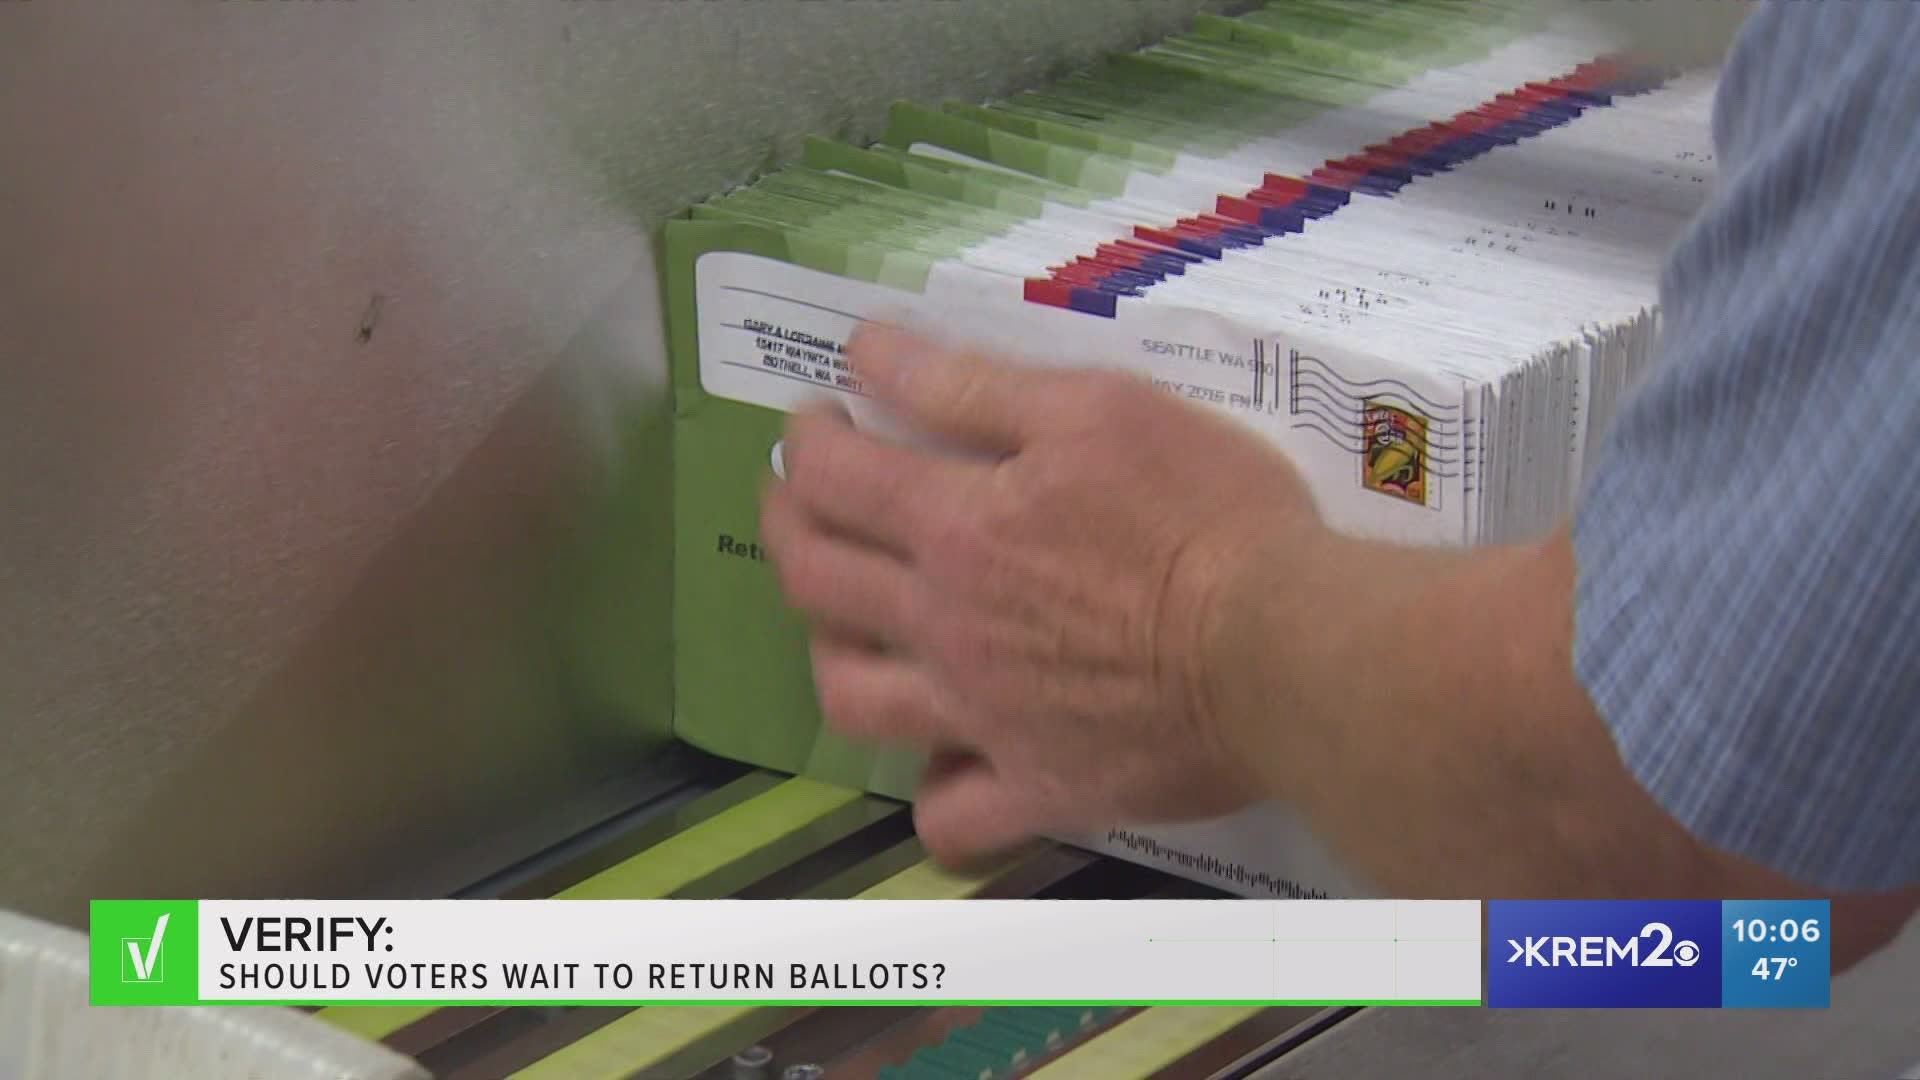 With more people than ever voting by mail due to the coronavirus pandemic, people have asked about the safety of turning in ballots early.